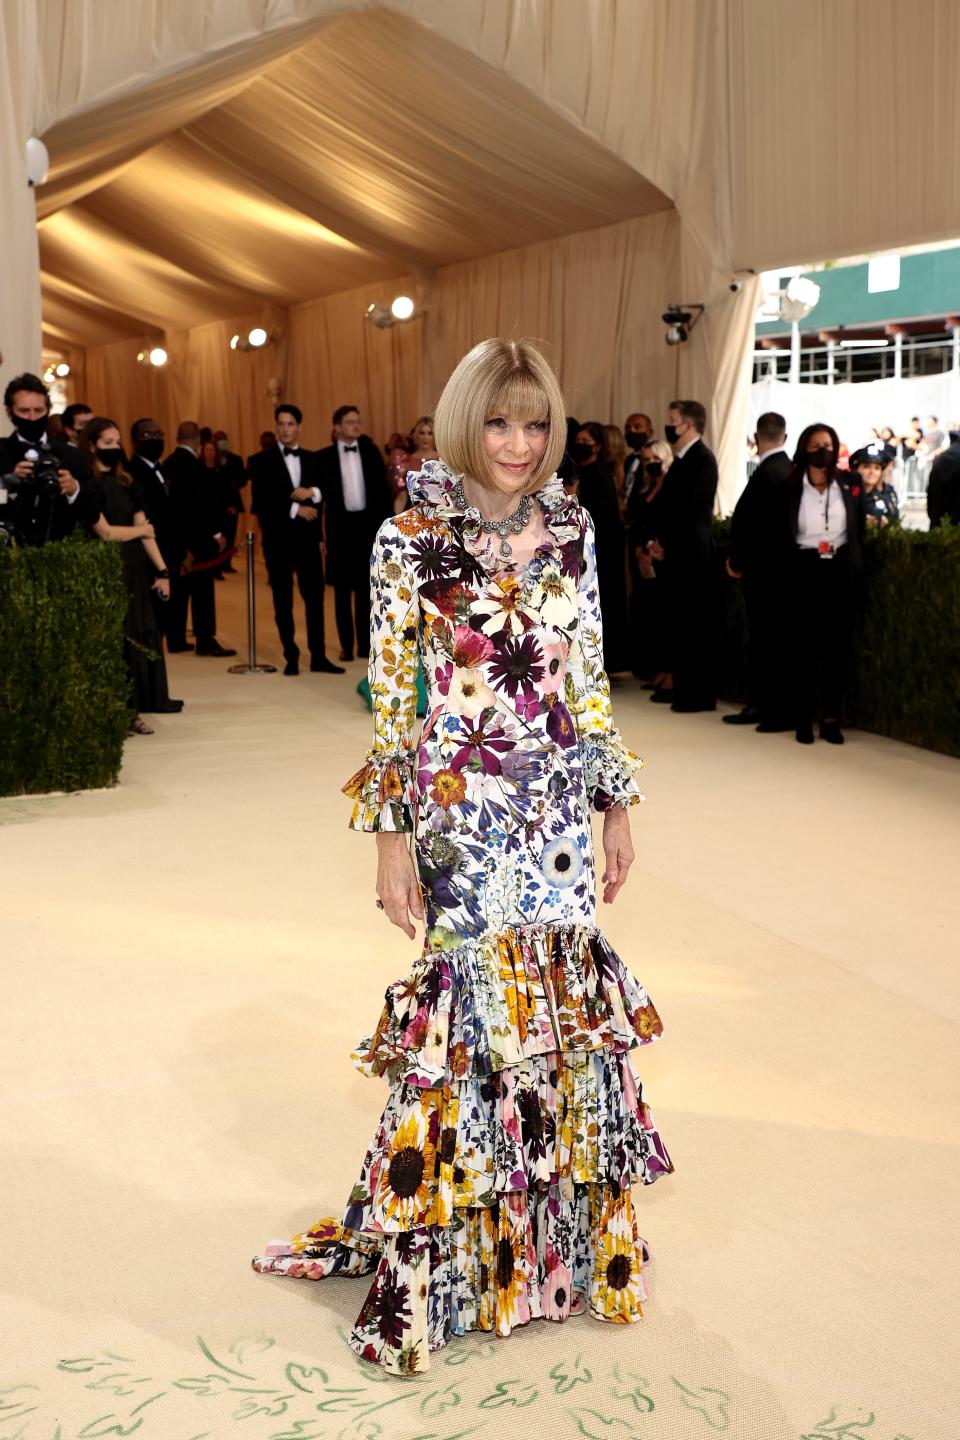 Anna Wintour wears a floral dress on the 2021 Met Gala red carpet.